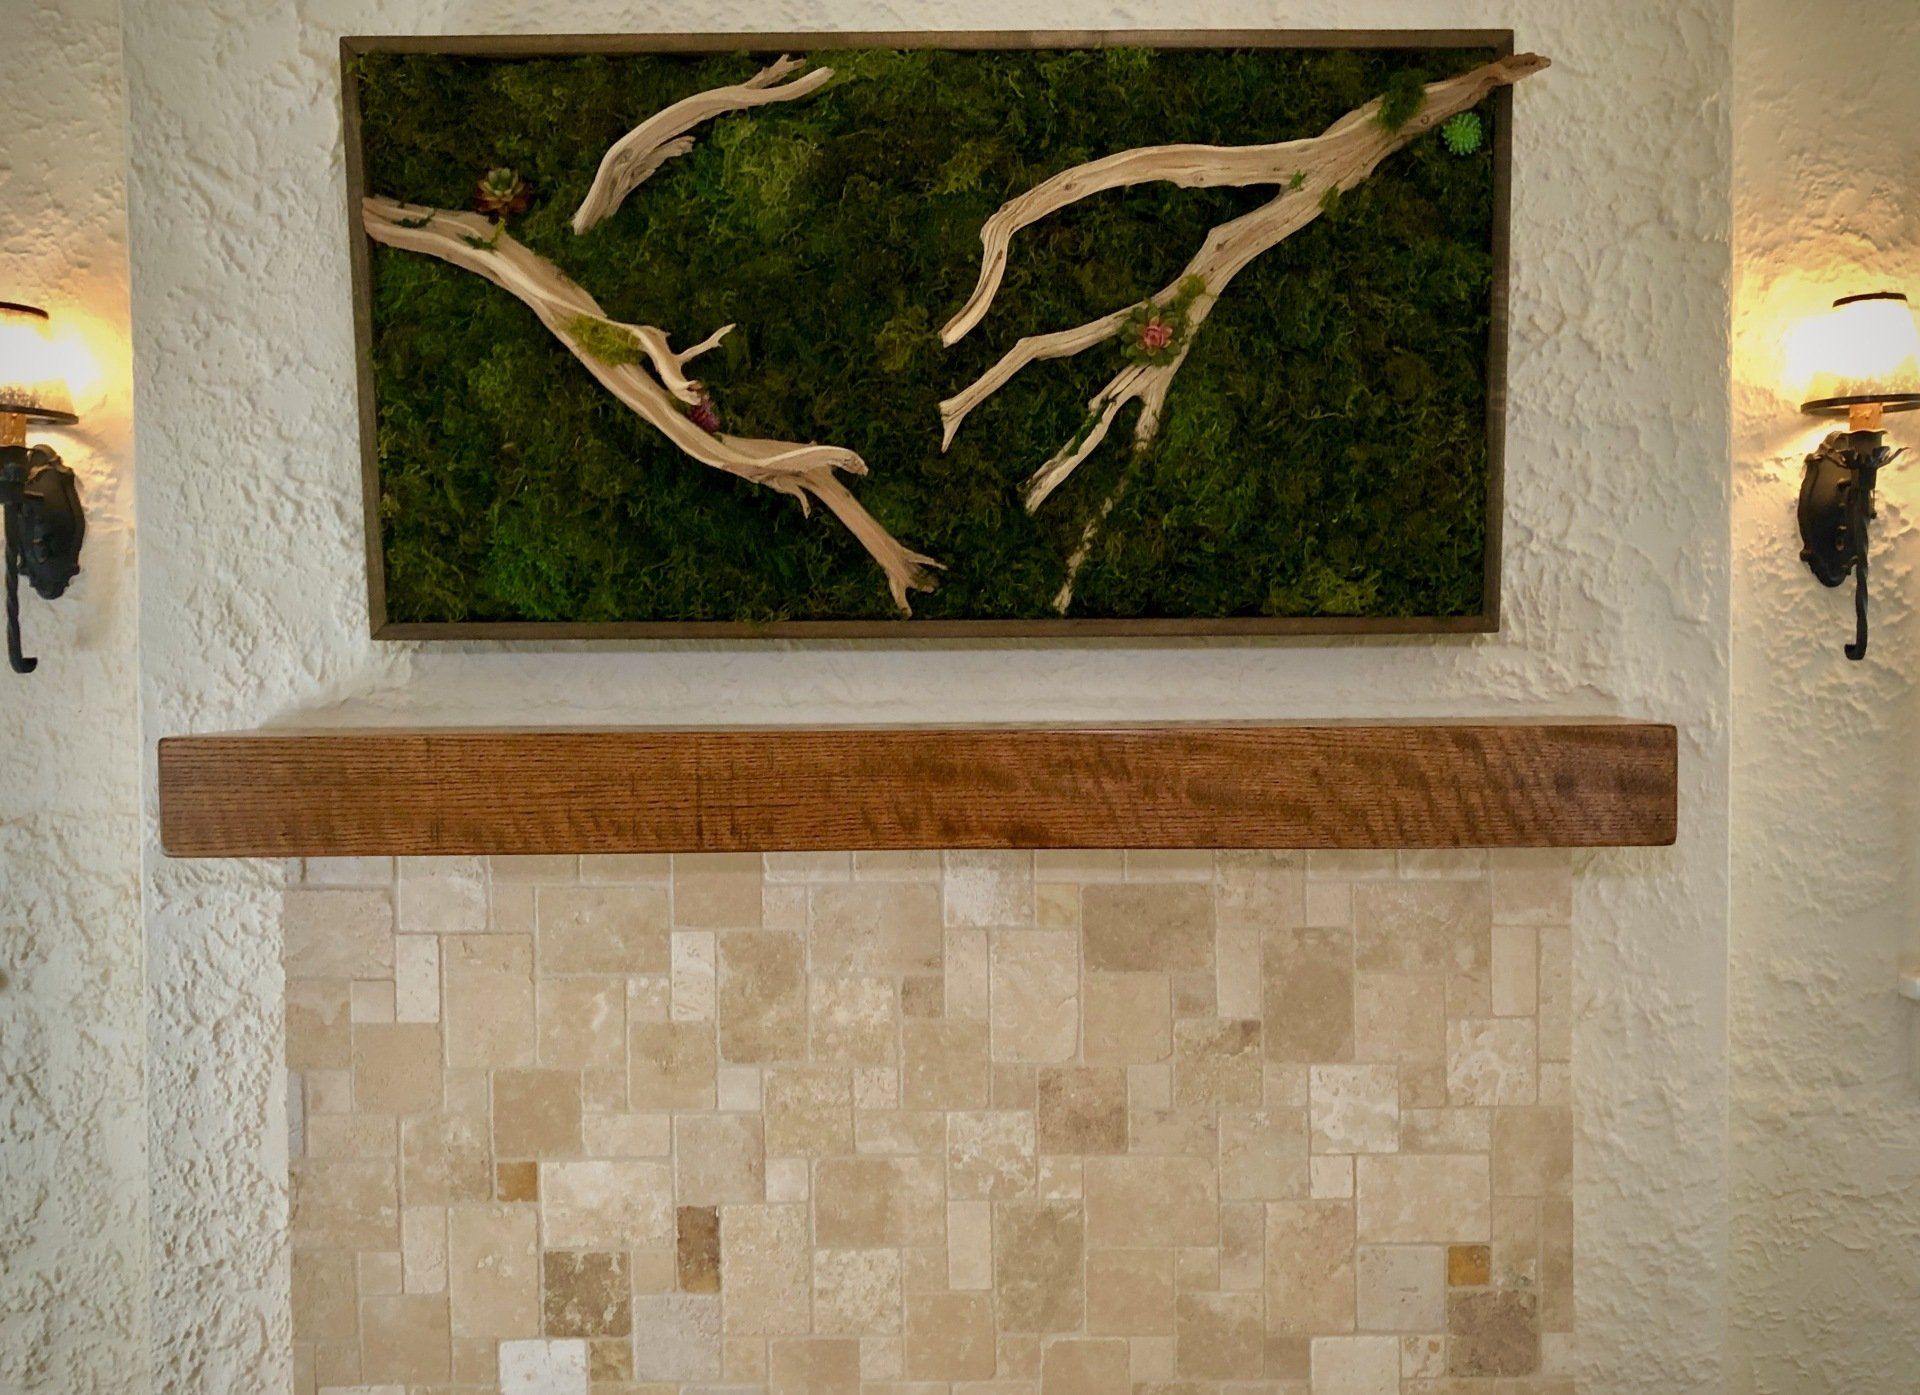 Right Brane Design and moss wall design and build